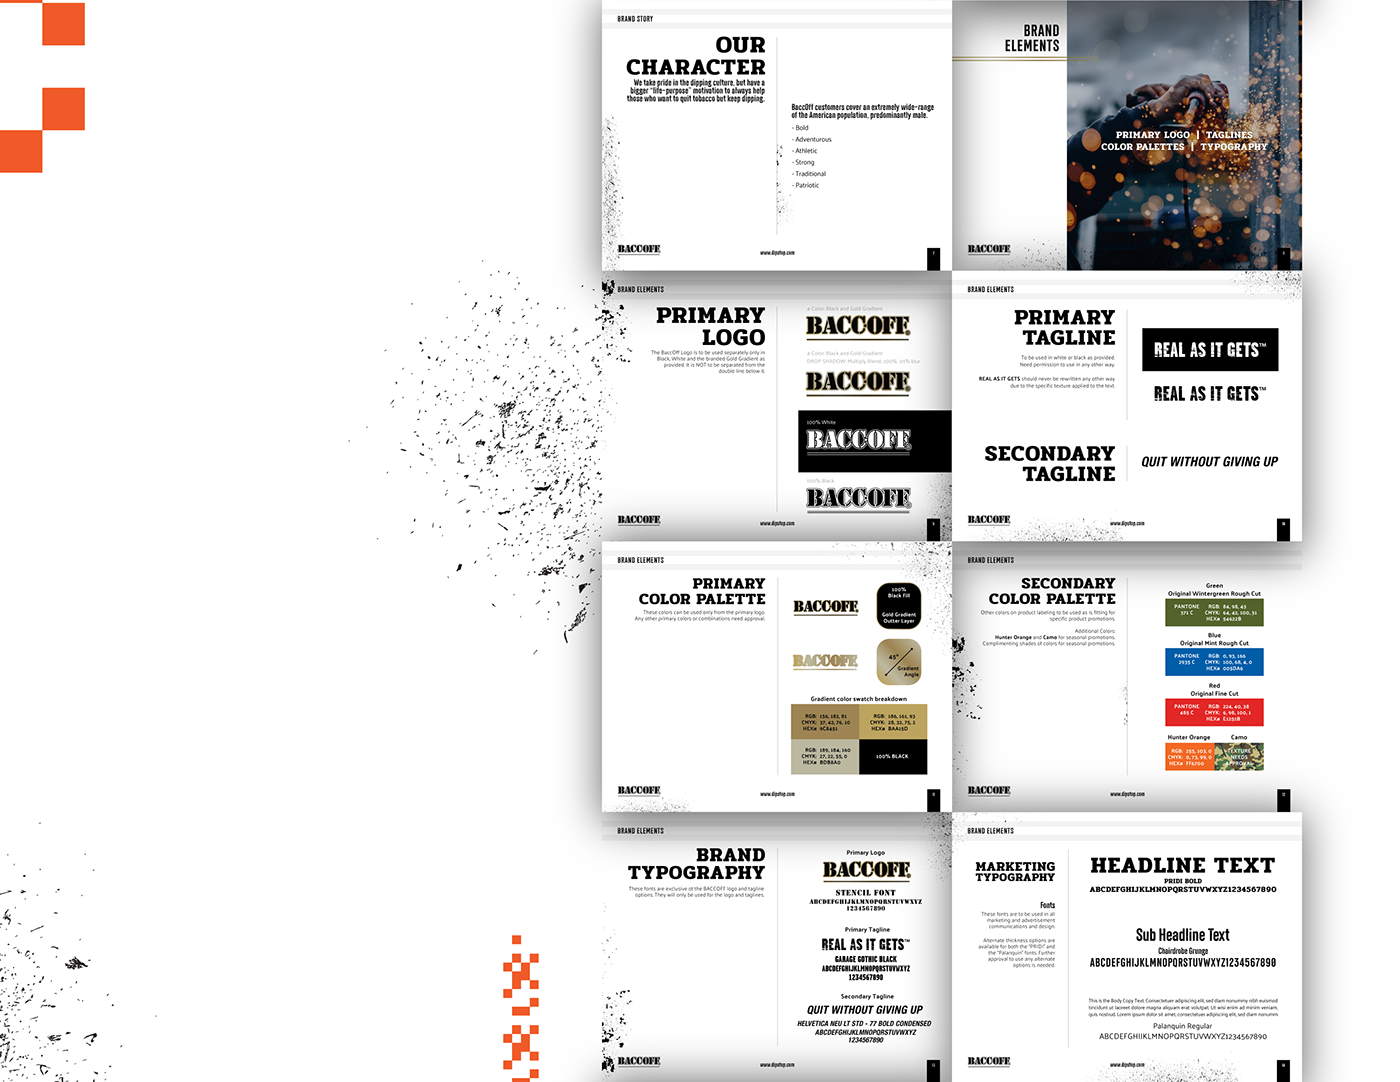 brand book Style Guide Booklet presentation portfolio guidelines branded Layout